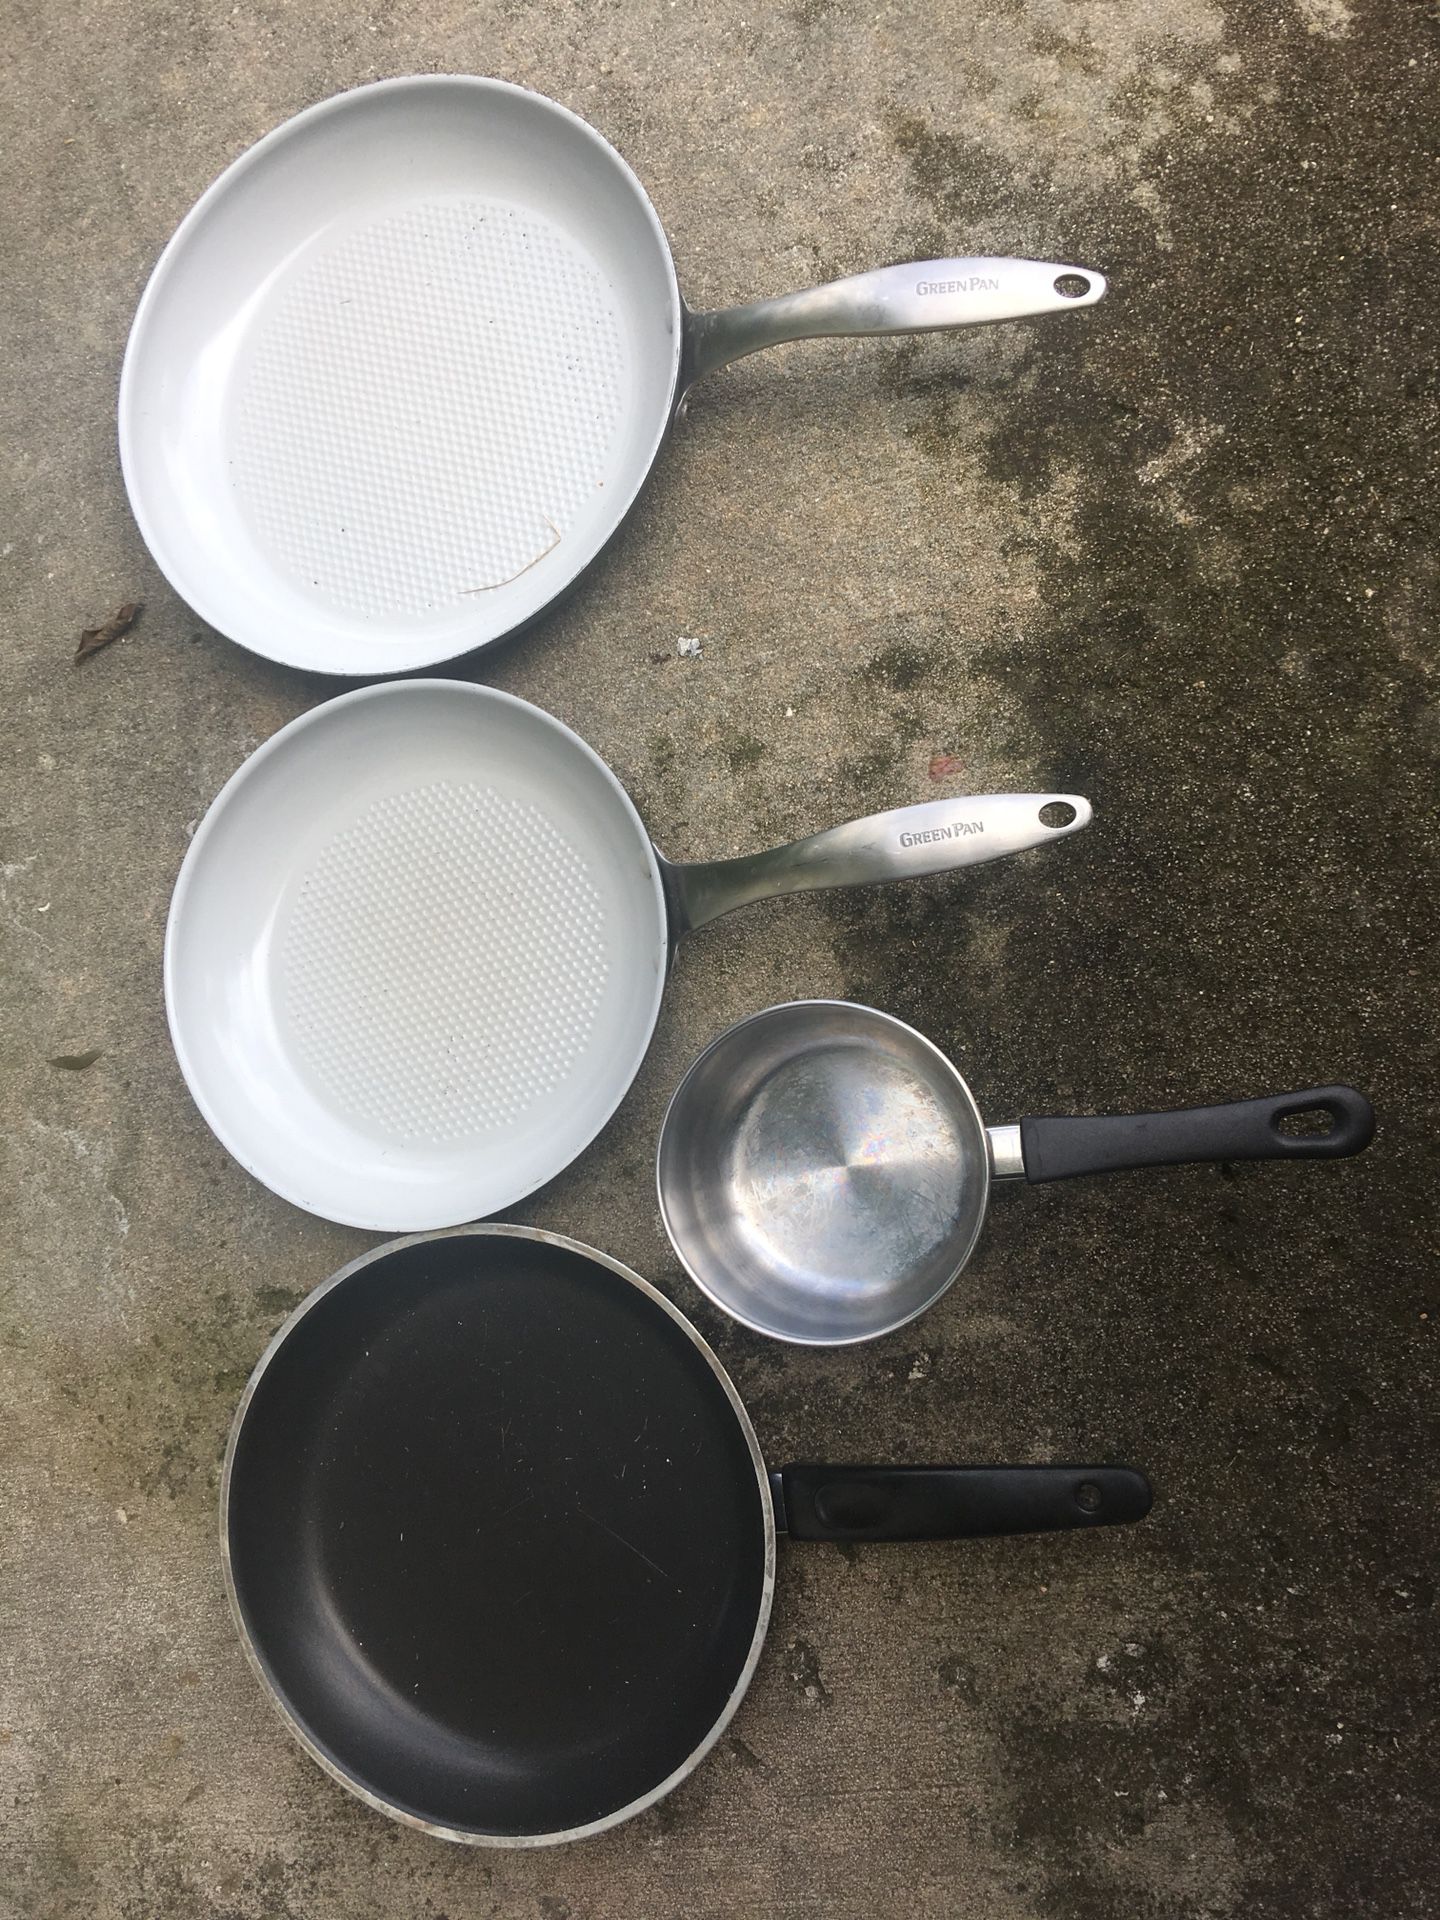 LOT of great sturdy pans and a small pot